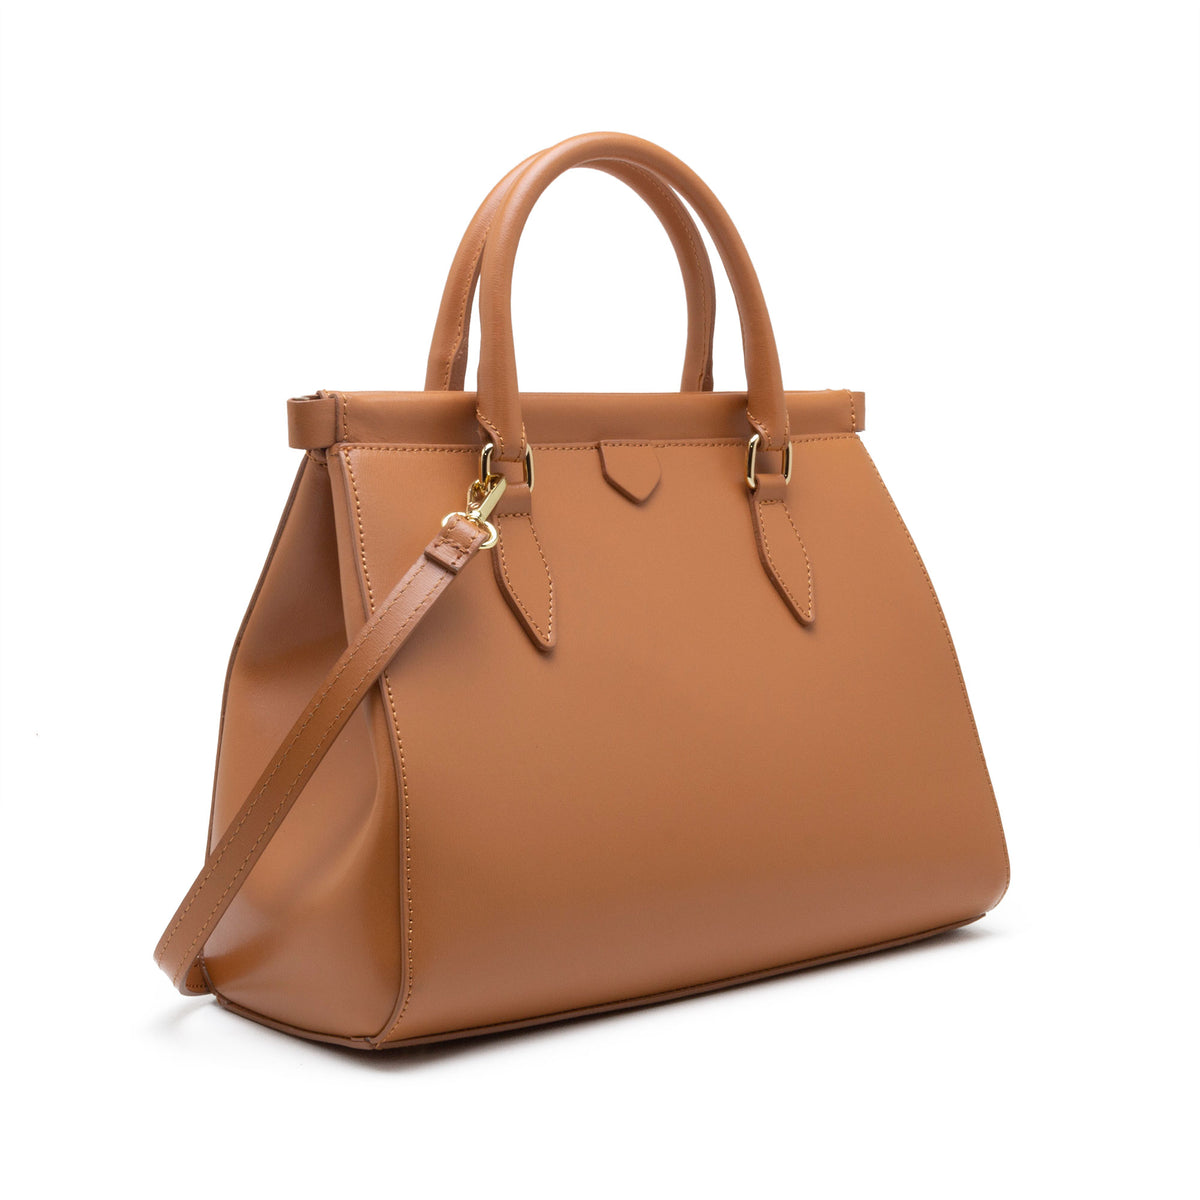 RACHEL TOTE BAG LARGE – Michele Lopriore